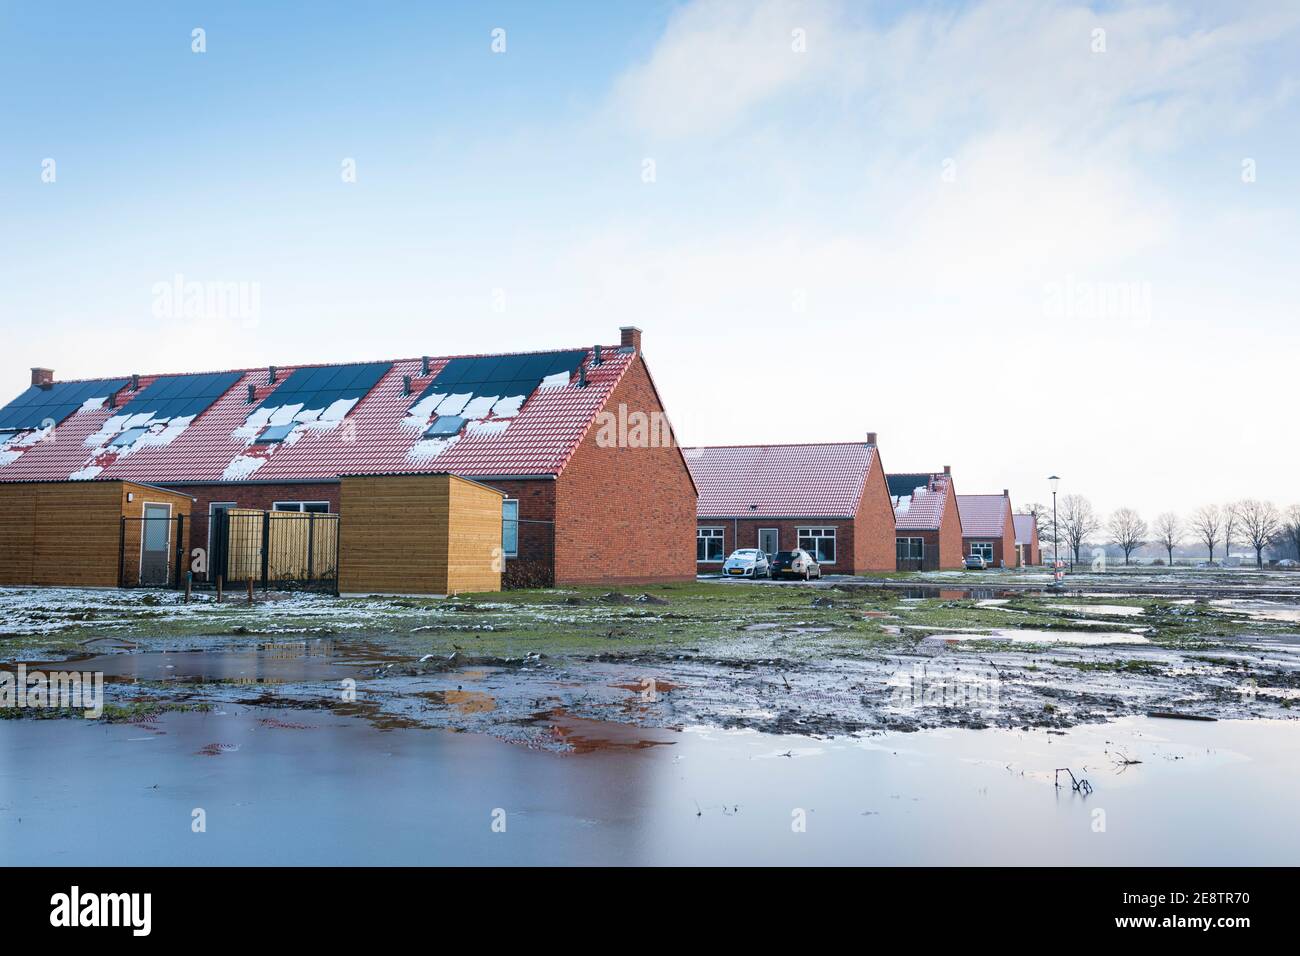 Sustainable new built homes with PV panels for social housing in the Netherlands Stock Photo